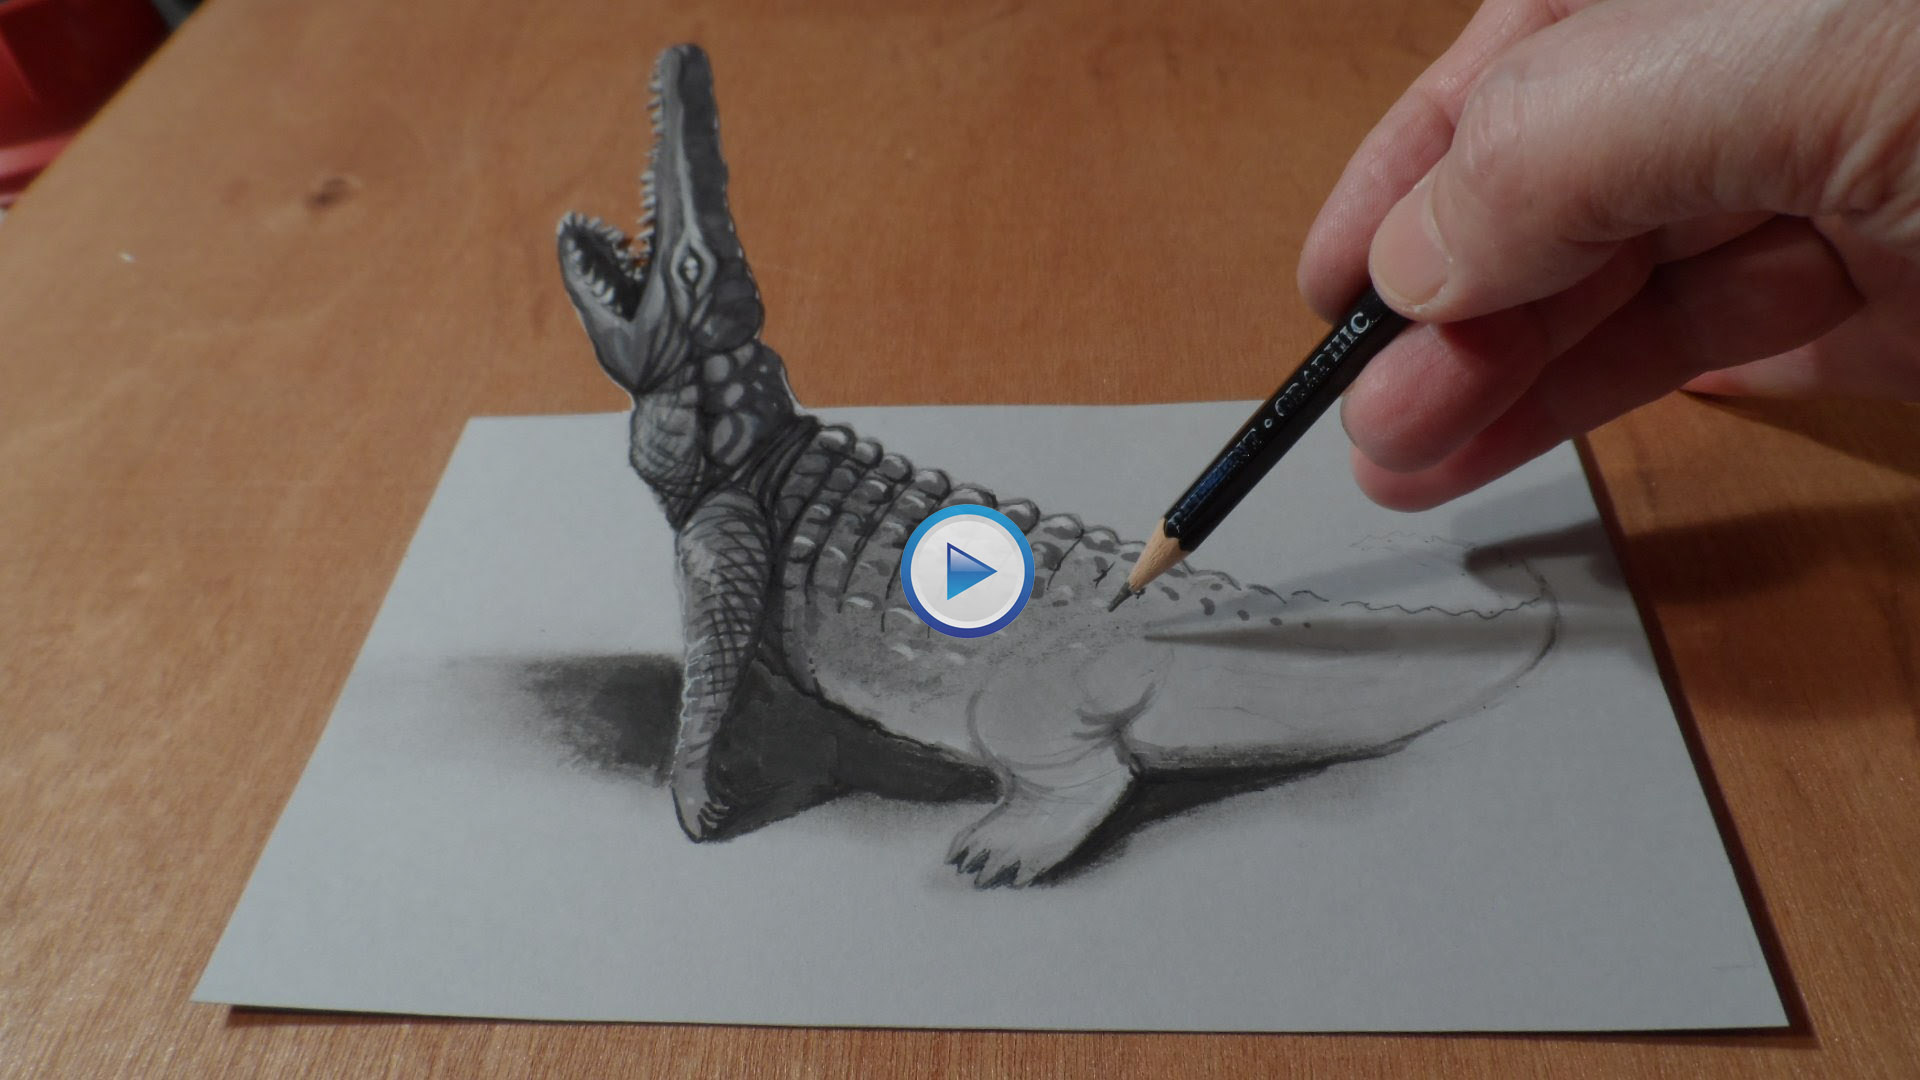 Optical Illusion Art Trick -How to Draw 3D Crocodile Painting?